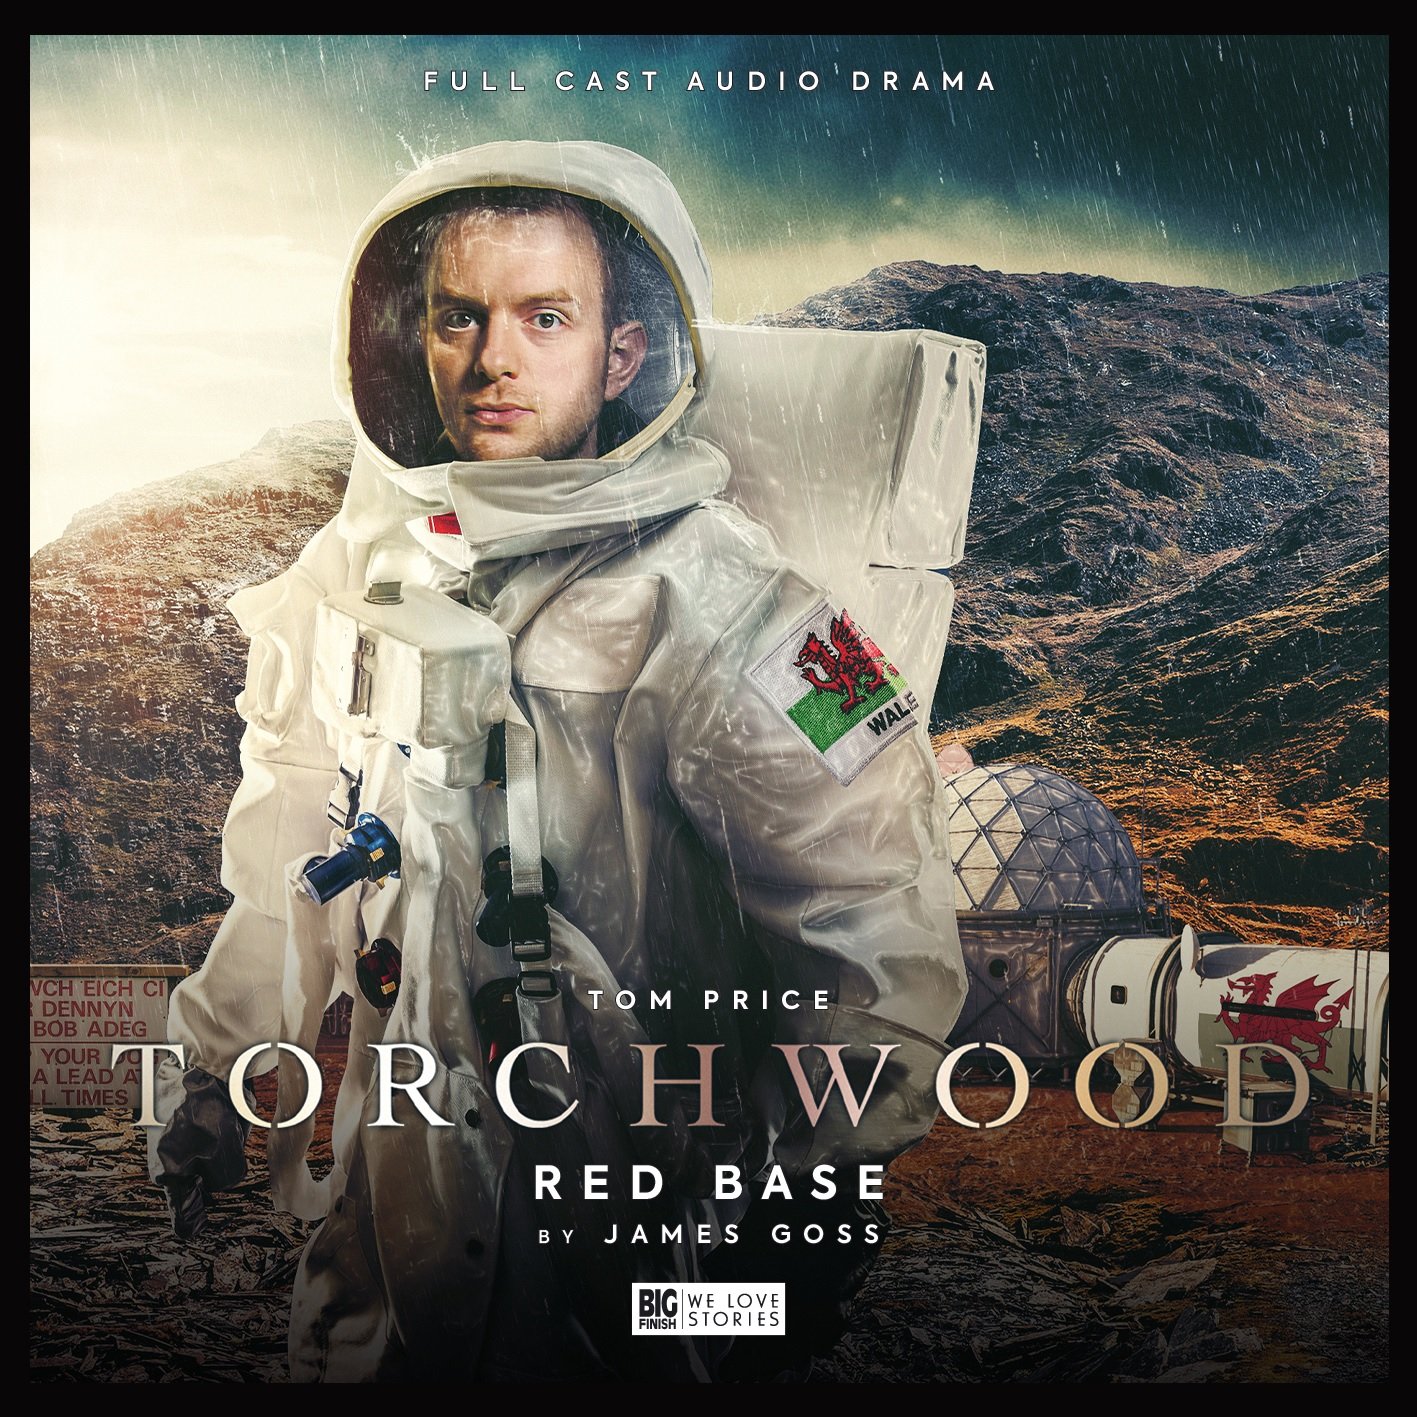 Reviewed: Big Finish’s Torchwood – Red Base